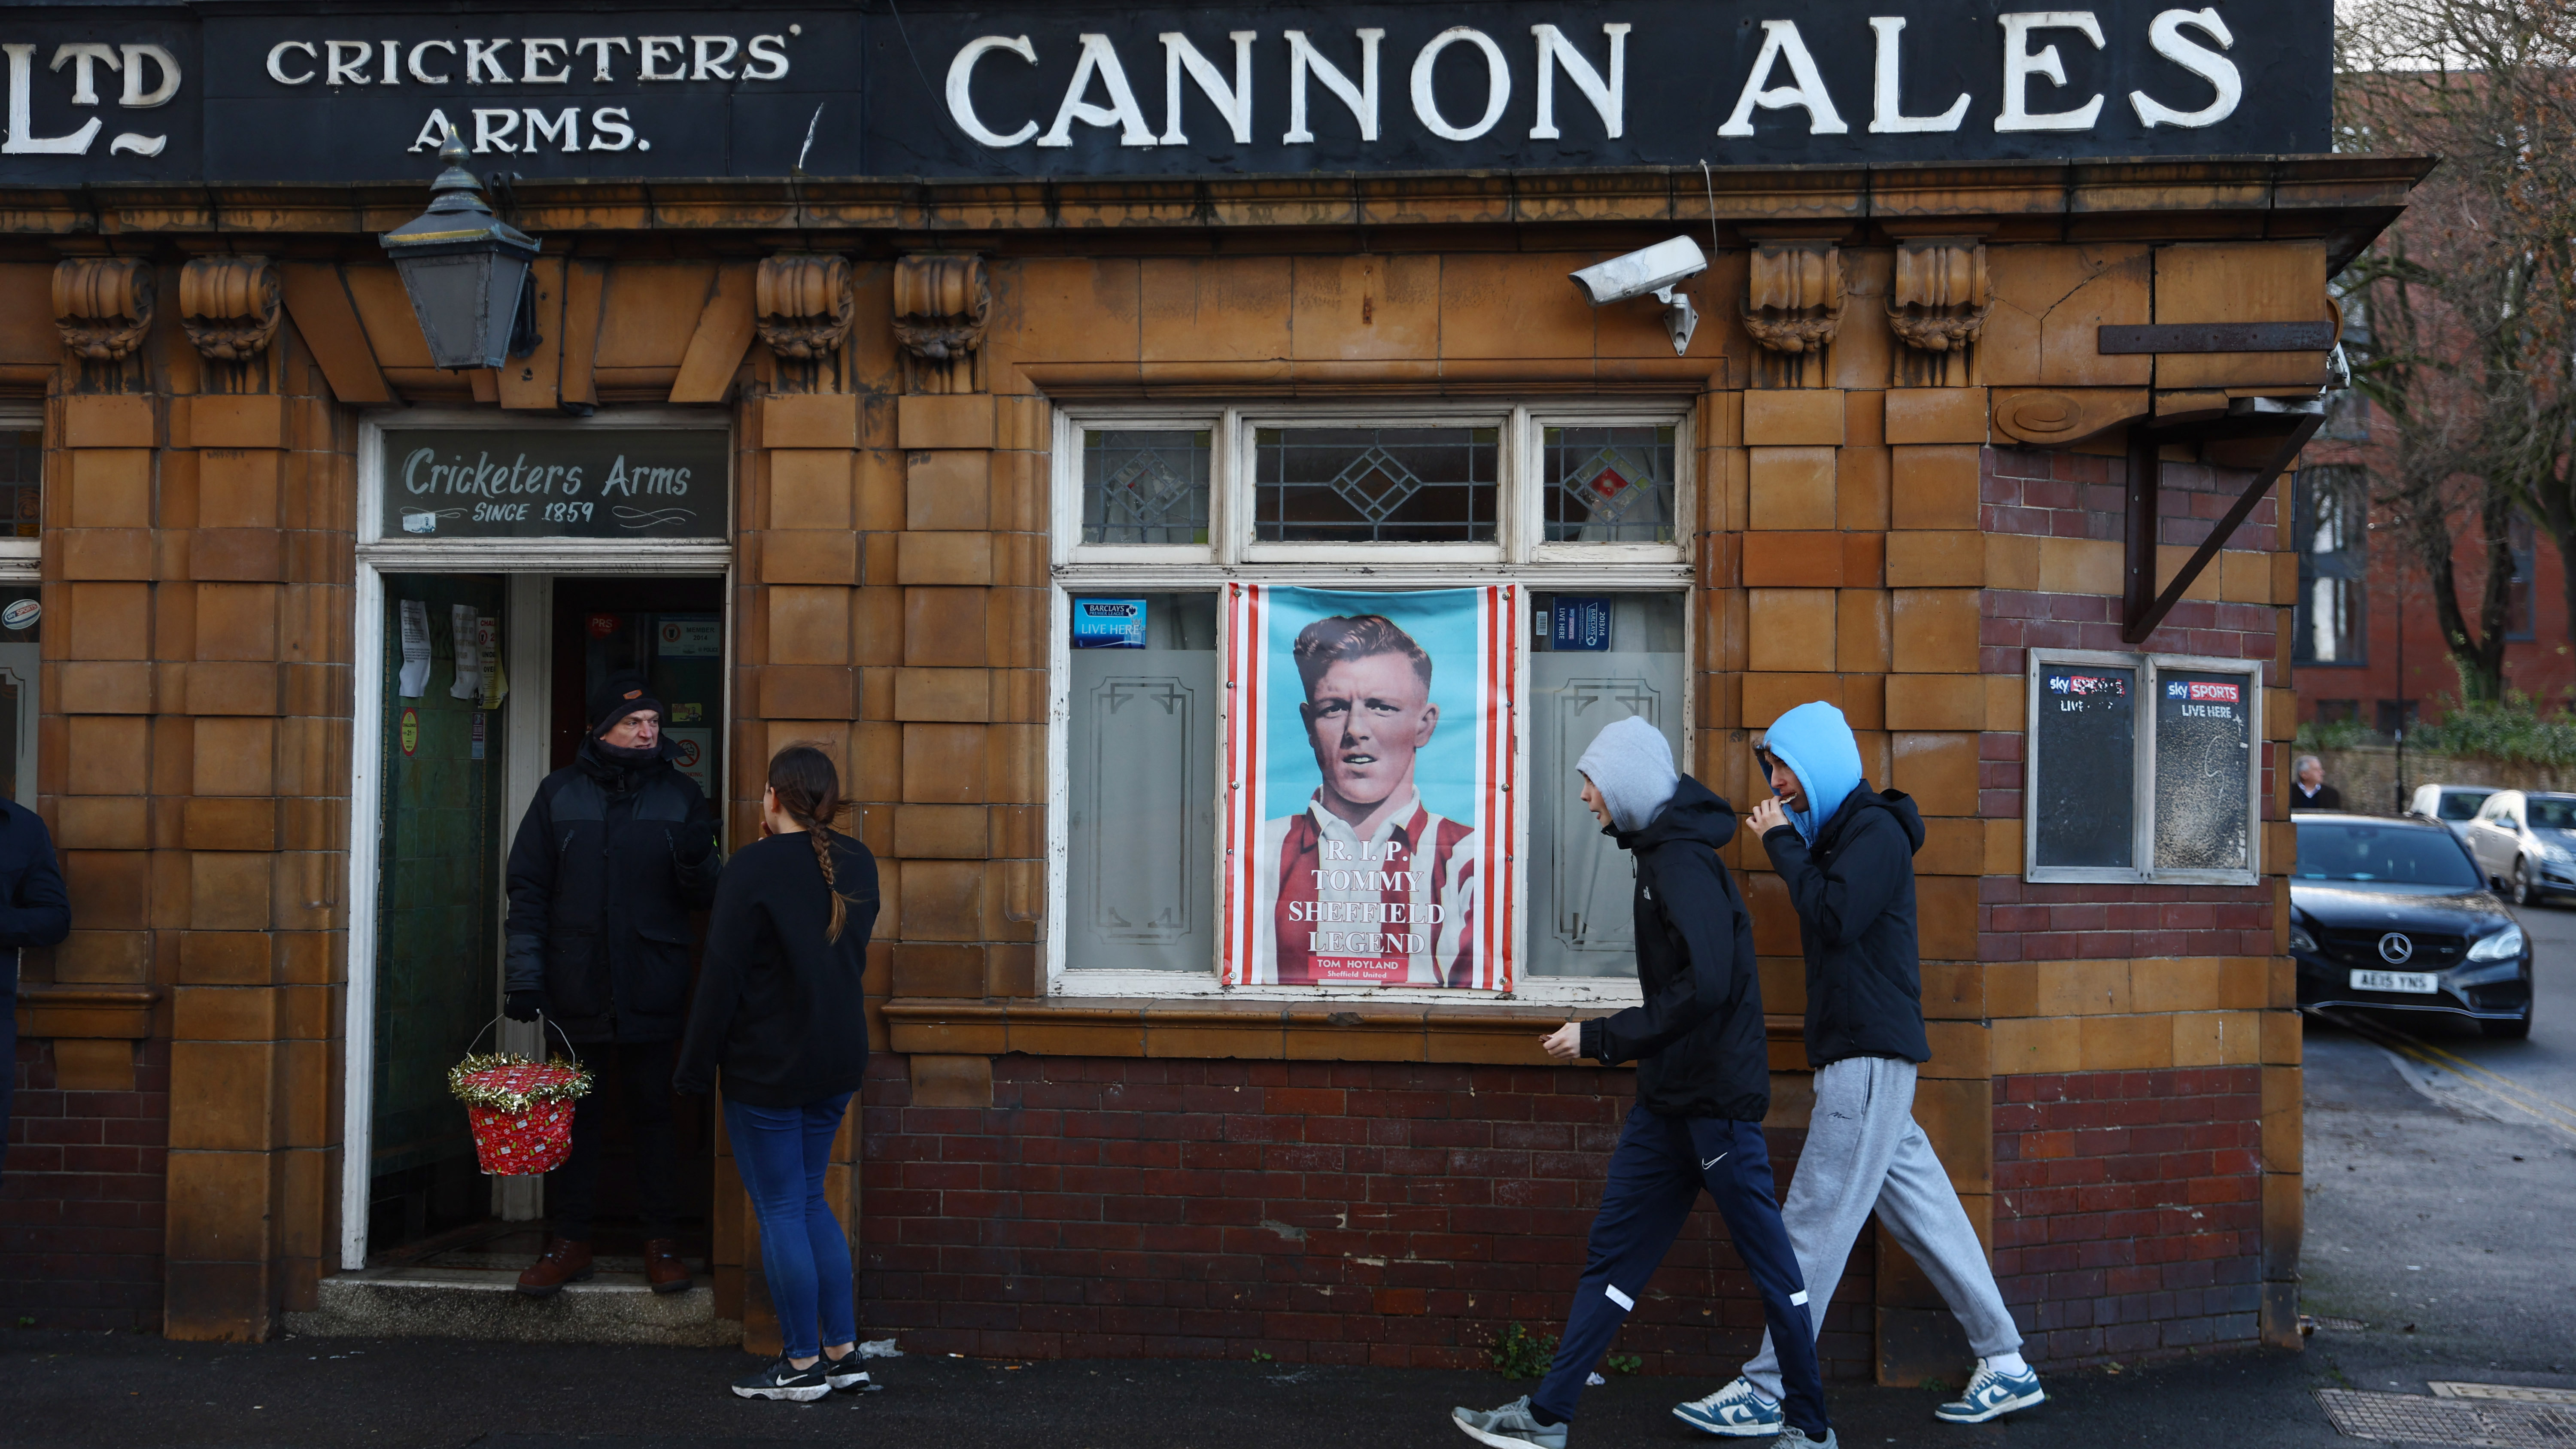 Britain's public houses are under threat because of a variety of factors. /Lee Smith/Action Images via Reuters